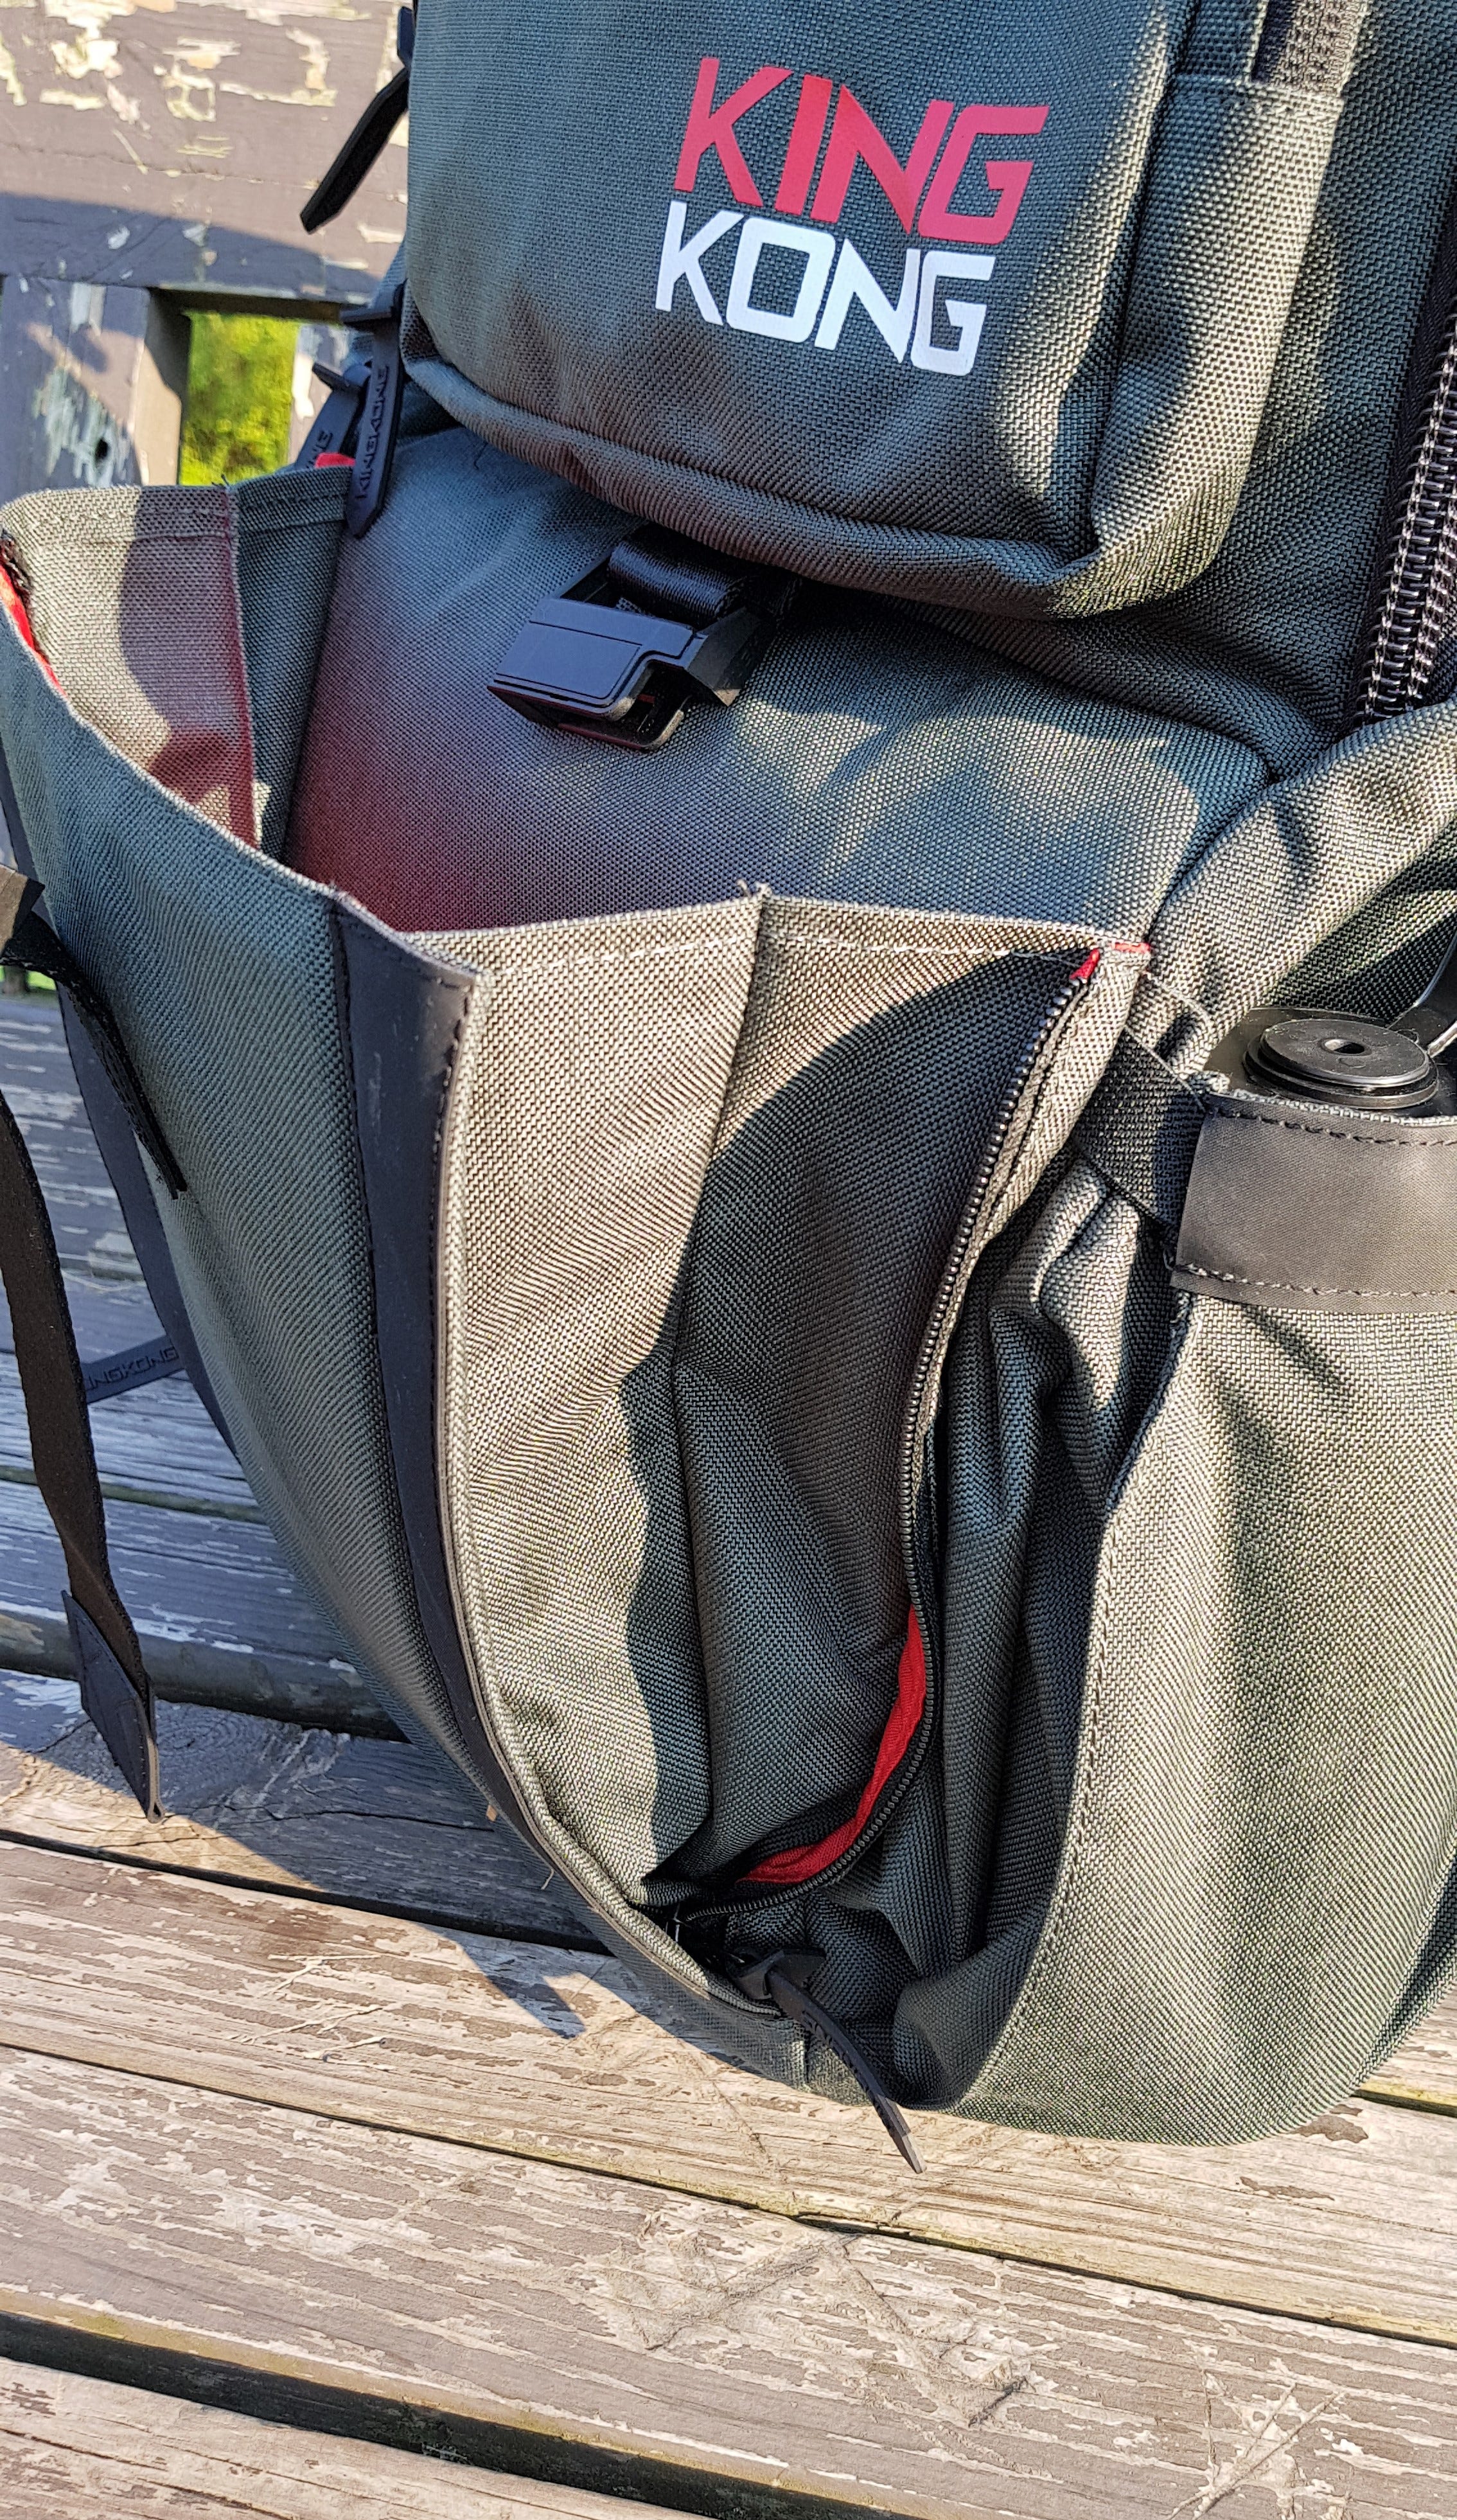 King Kong PLUS26 Backpack Review. We recently reviewed the King